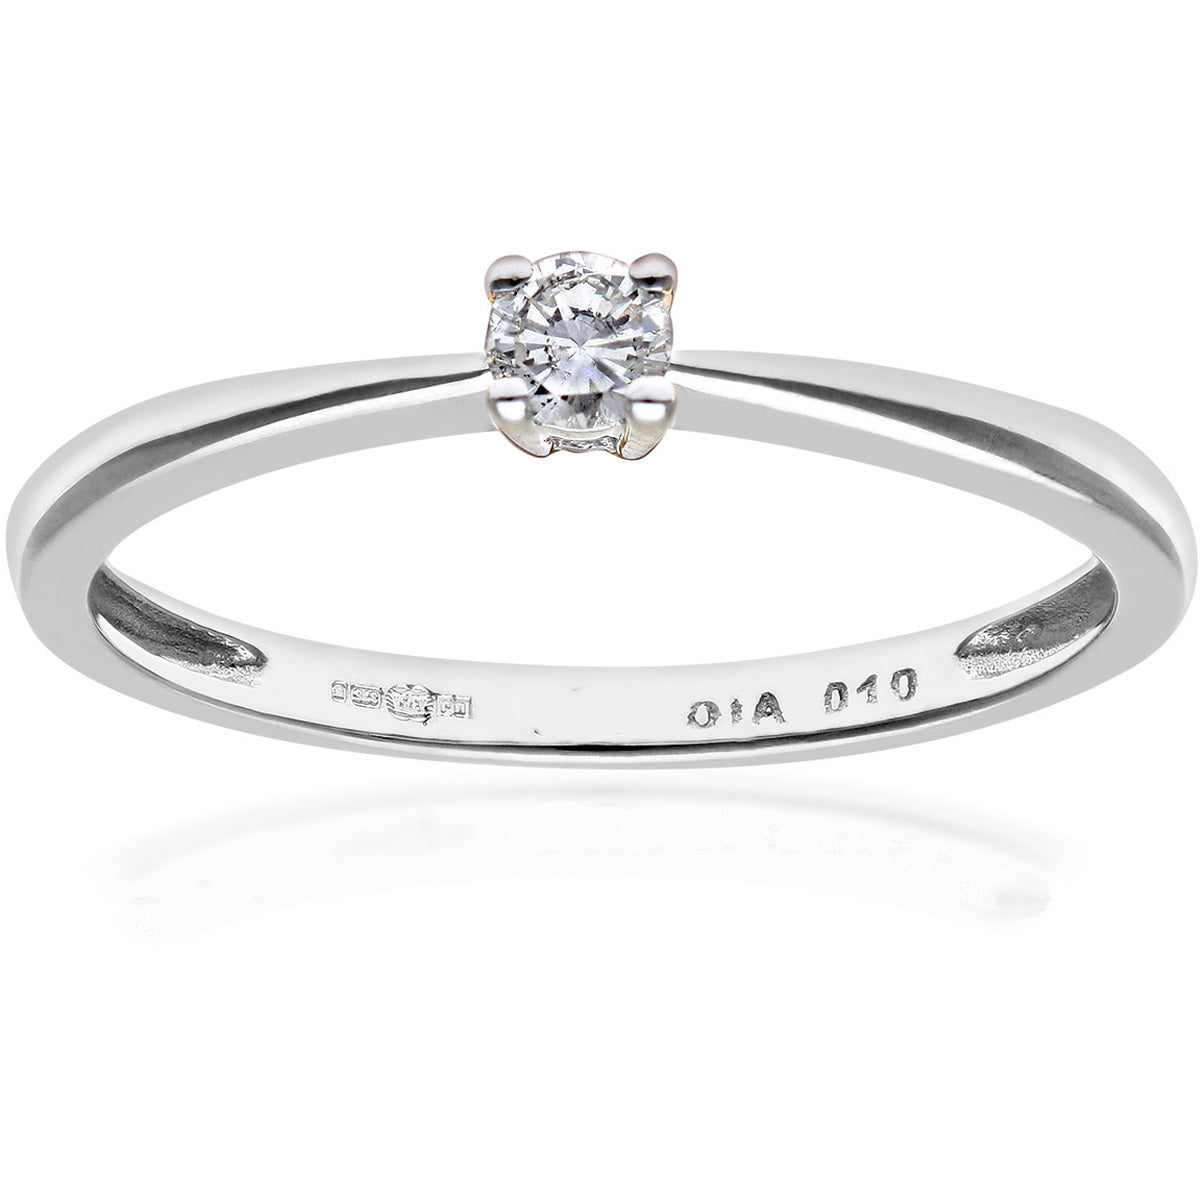 9ct White Gold  10pts Diamond 4 Claw Solitaire Engagement Ring - PR0AXL4304W9JPK